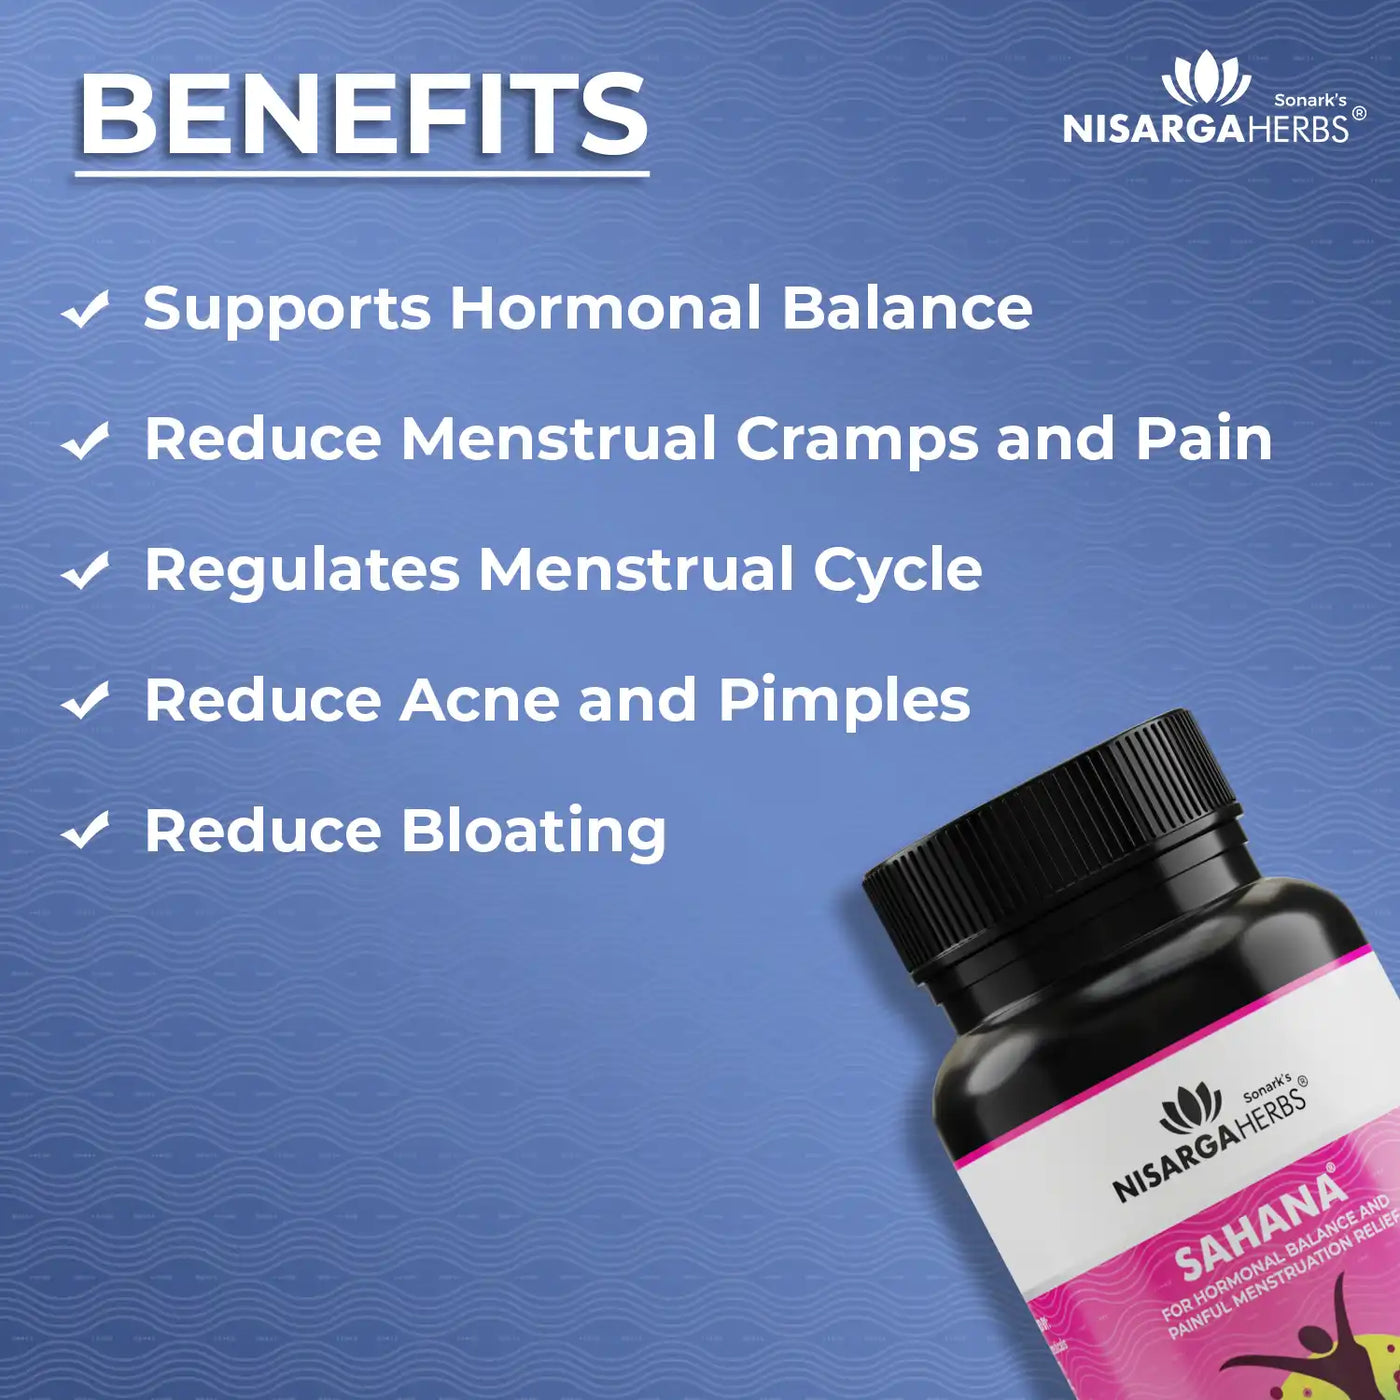 benefits of sahana capsule include regulating menstrual cycle, reduce bloating, reduce acne and pimples, reduce pain during menstruation, and support hormonal balance. 